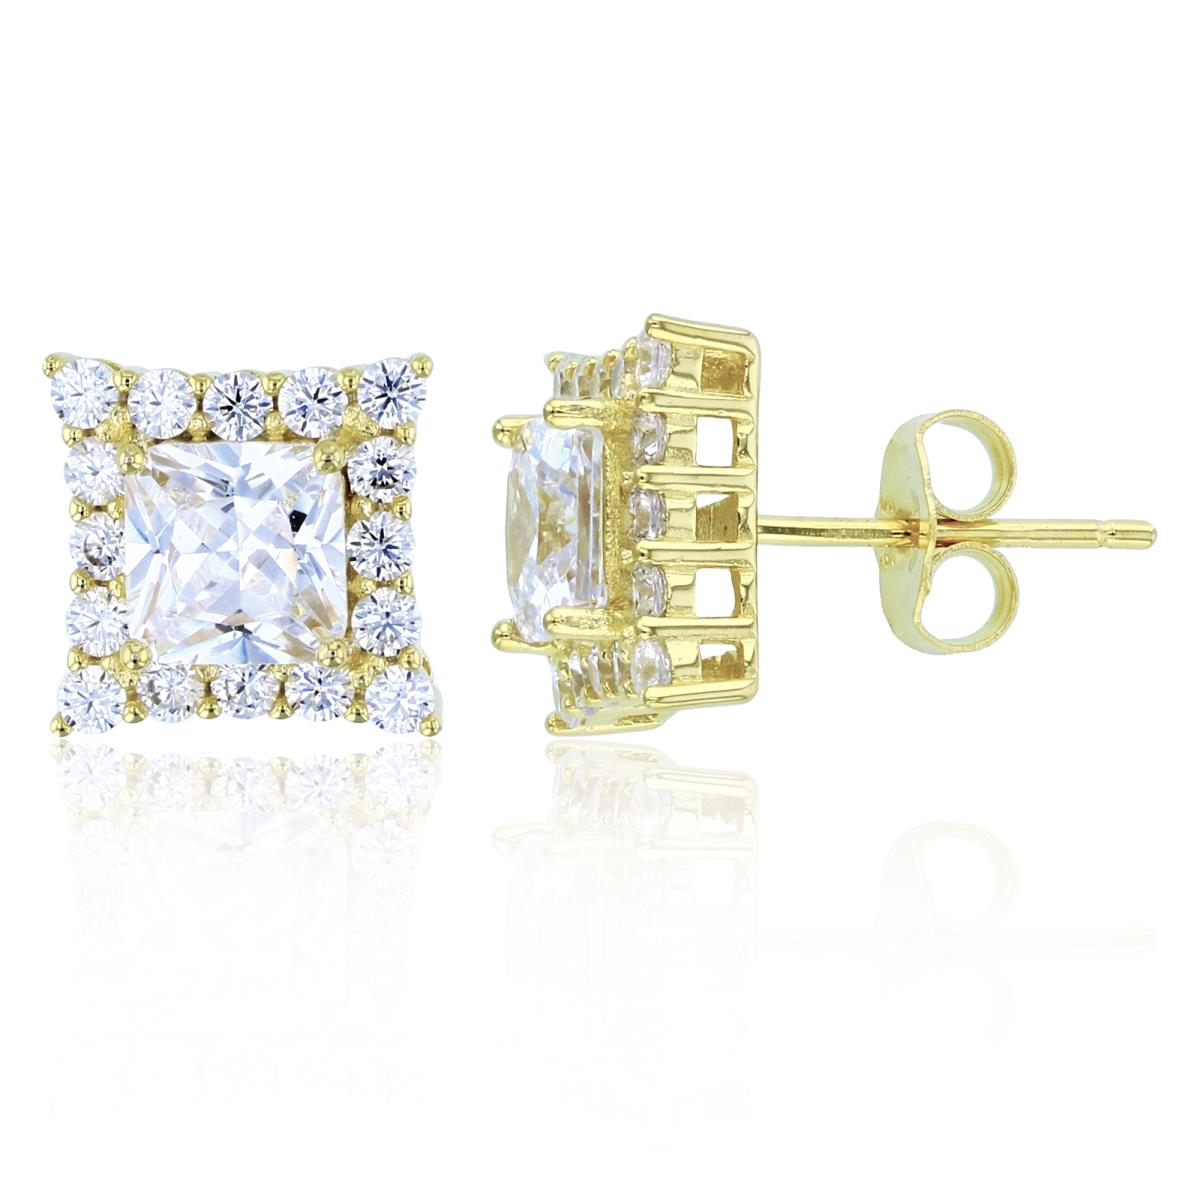 Sterling Silver+1Micron Yellow Gold 6mm Cush & Rnd White CZ Halo Square Studs